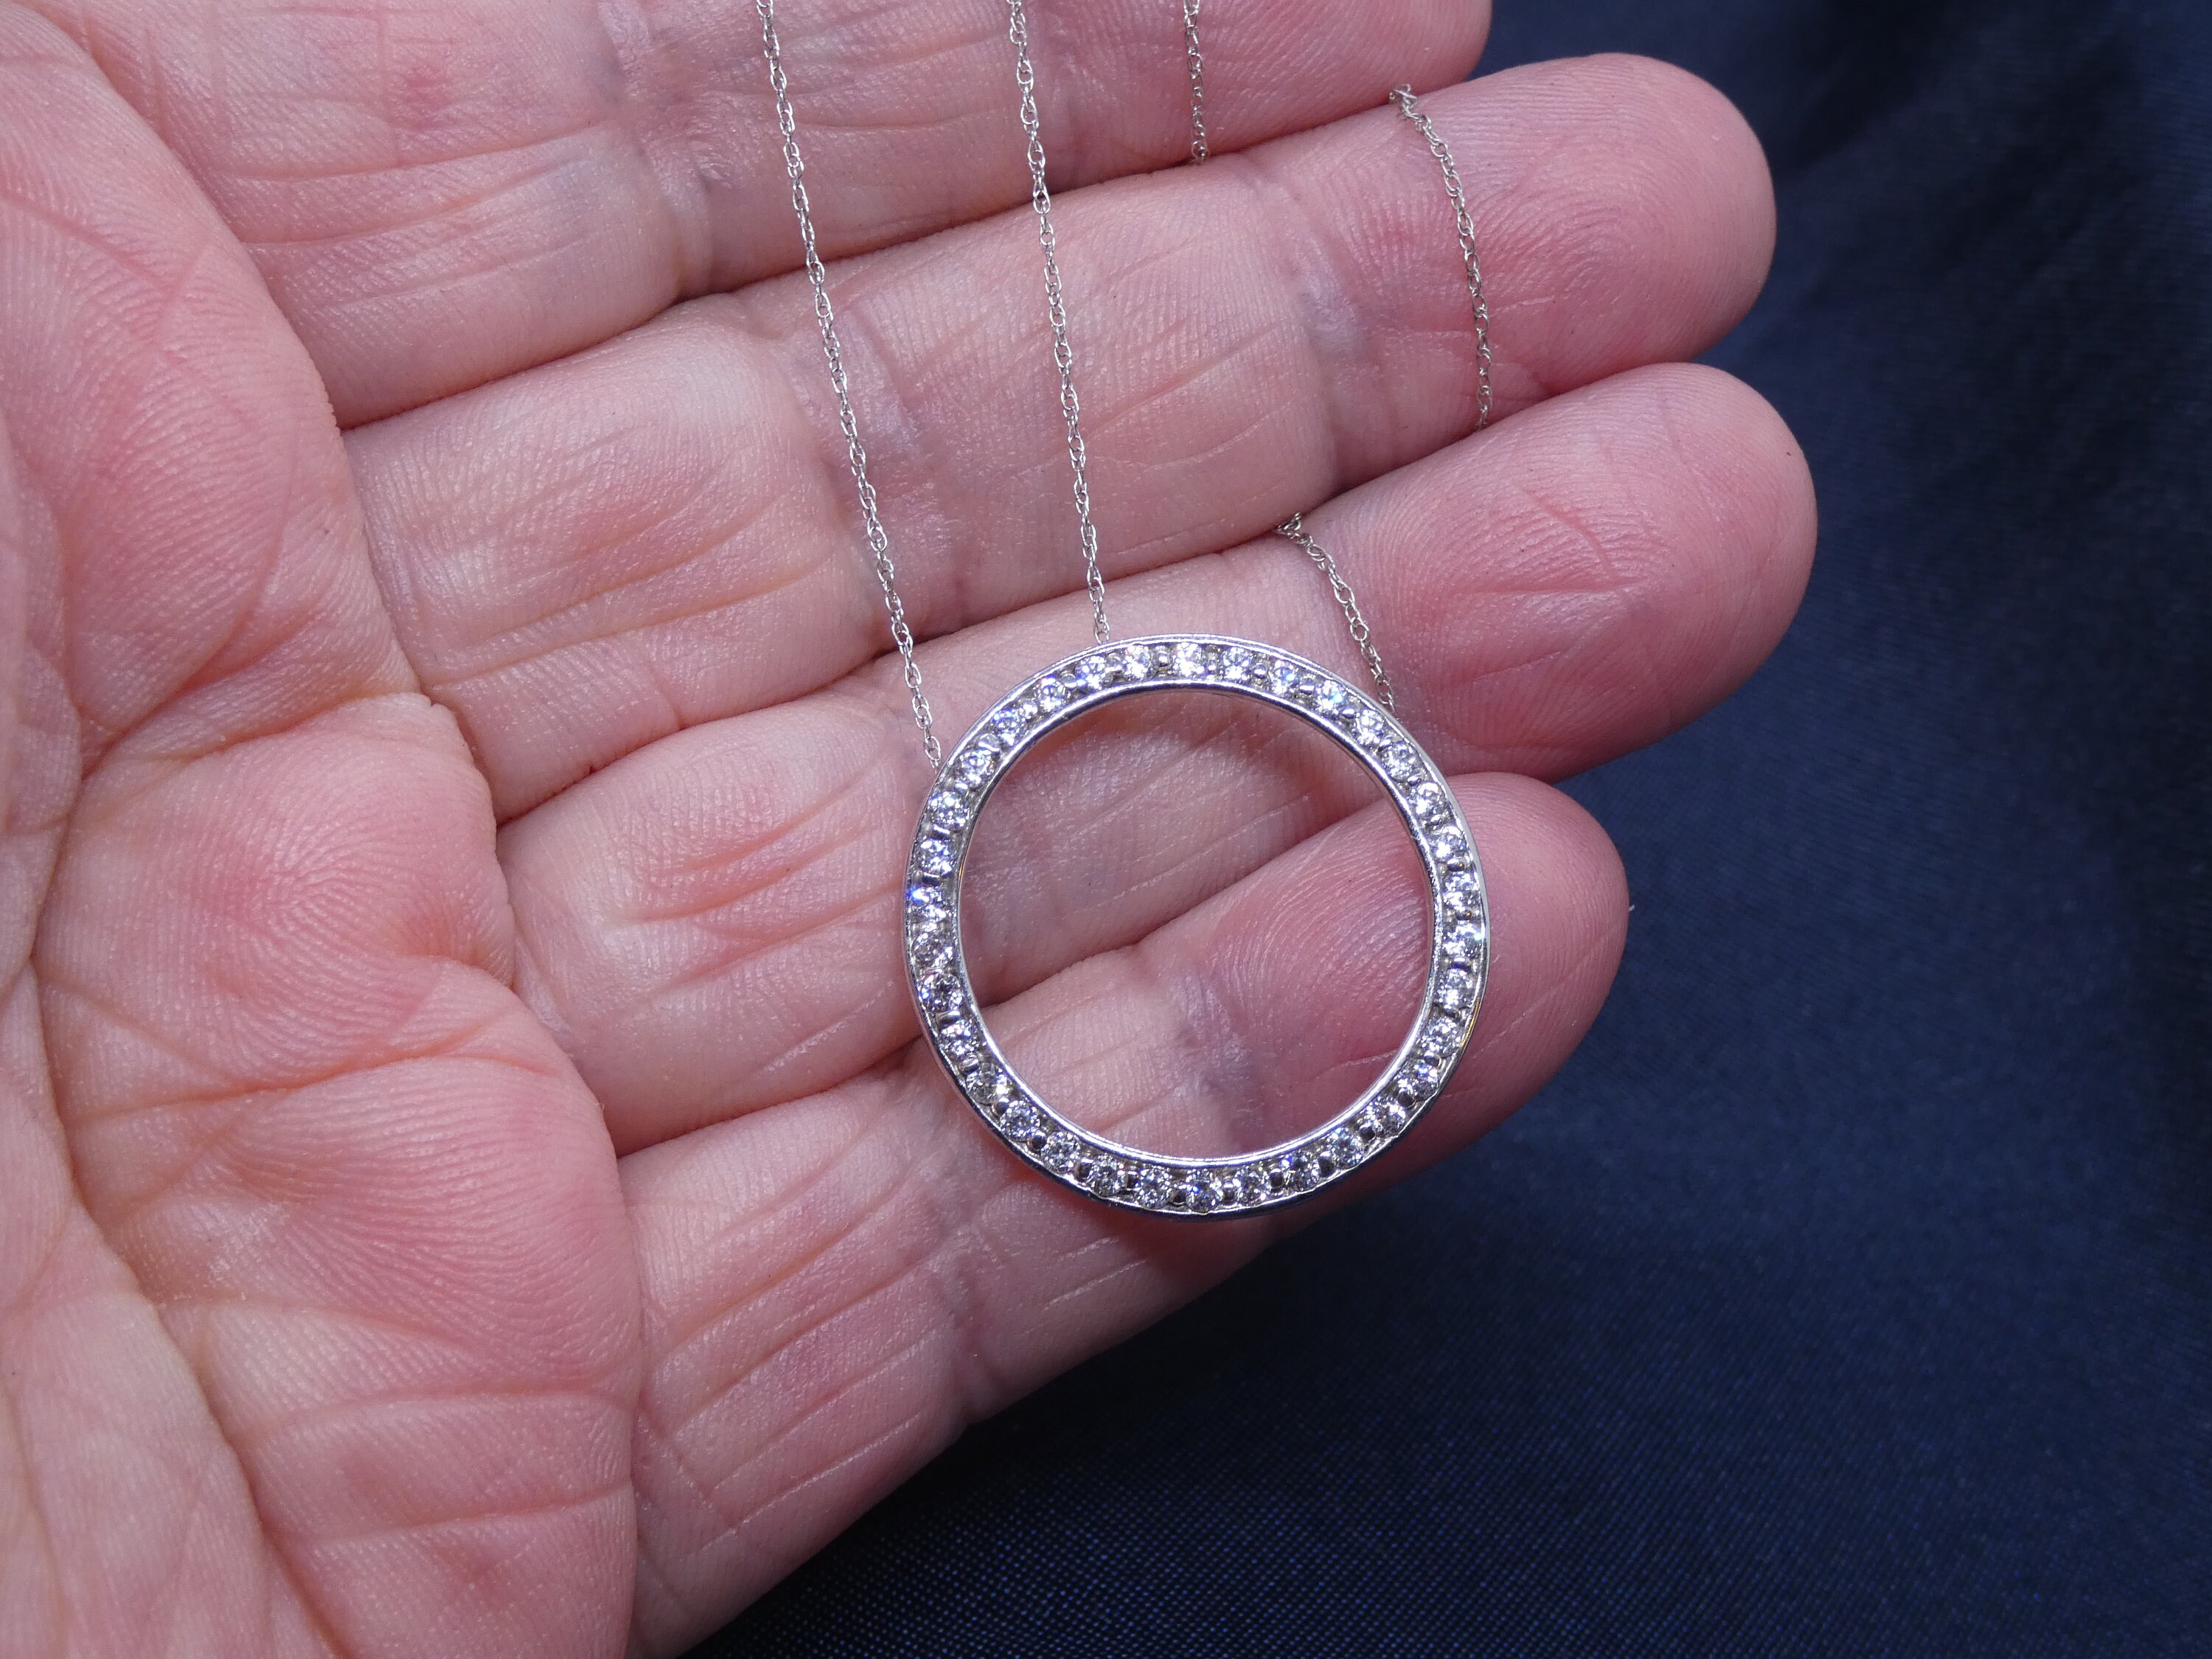 Pre-loved, 18ct Yellow+ White Gold Italian Diamond Necklace.